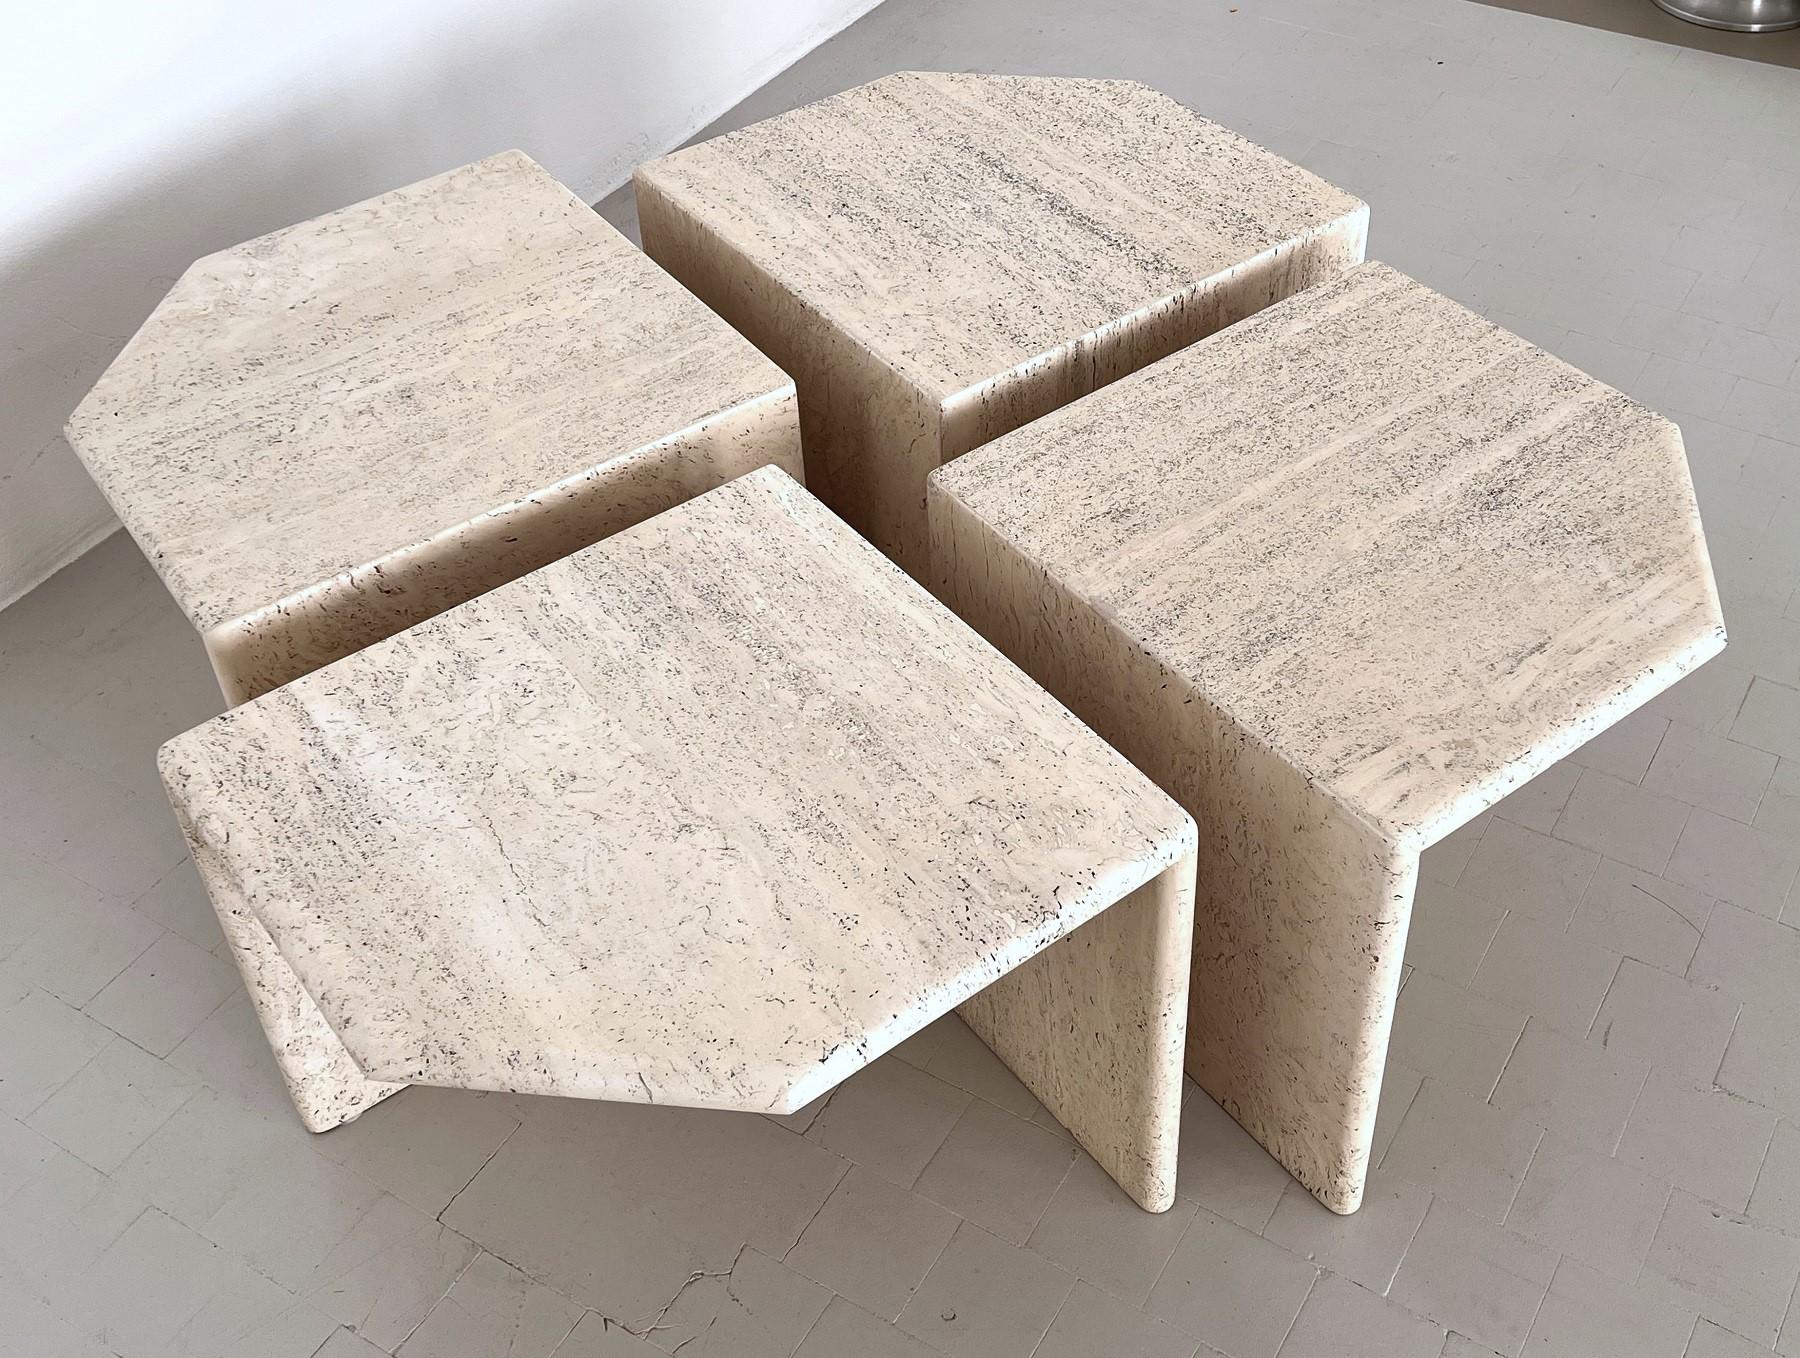 Italian Midcentury Sectional Travertine Marble Coffee Table of Four Pieces, 1970 For Sale 5